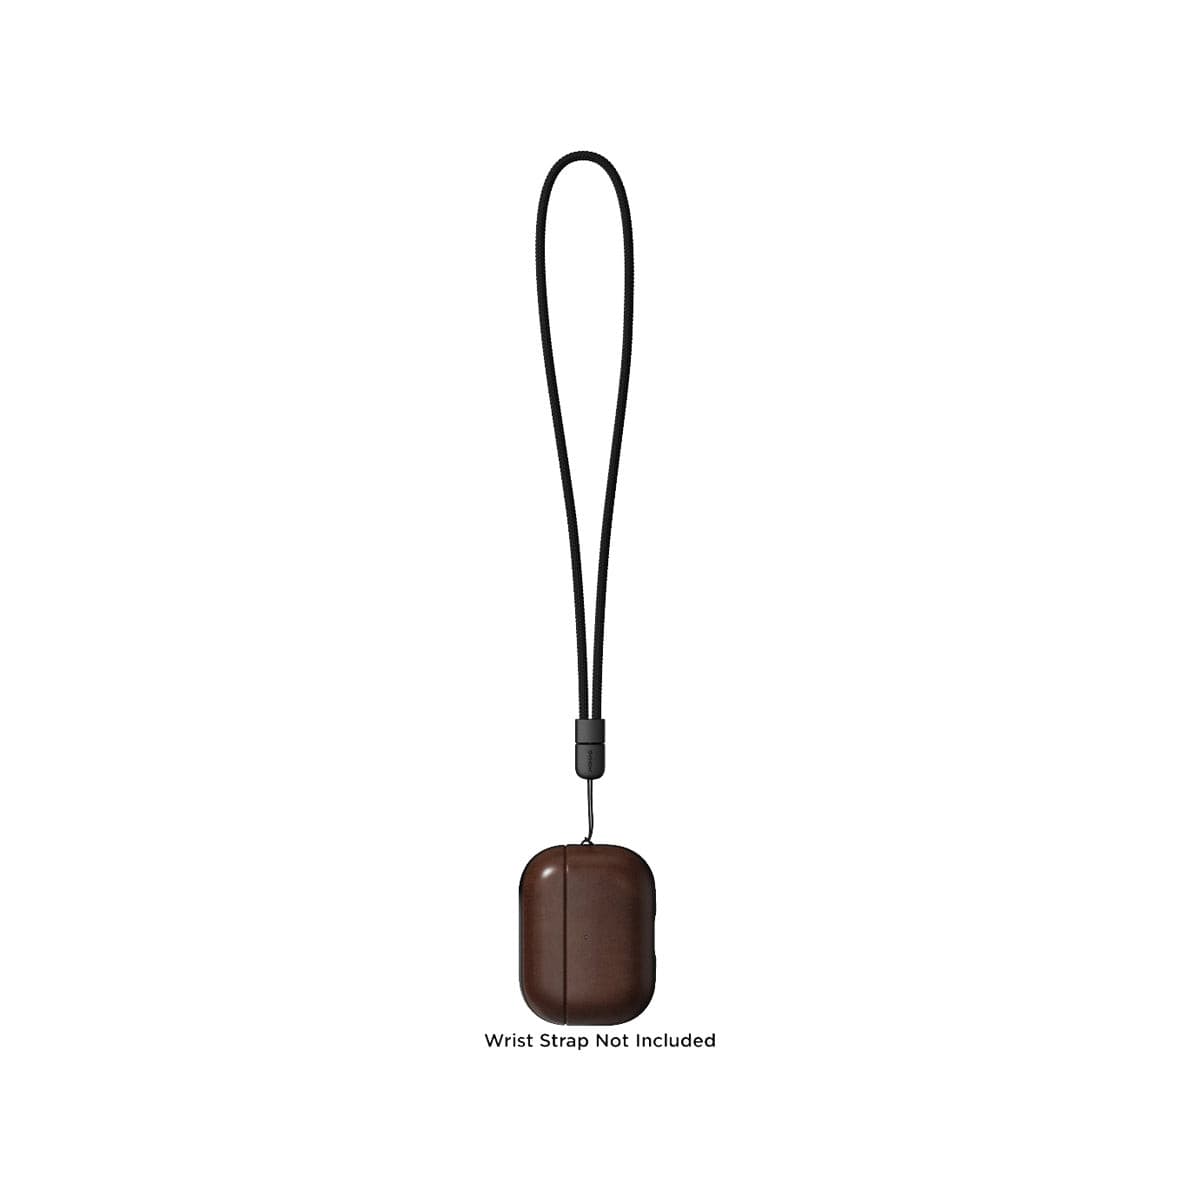 Nomad Modern Leather Case for AirPods Pro 2 - Rustic Brown Horween Leather.